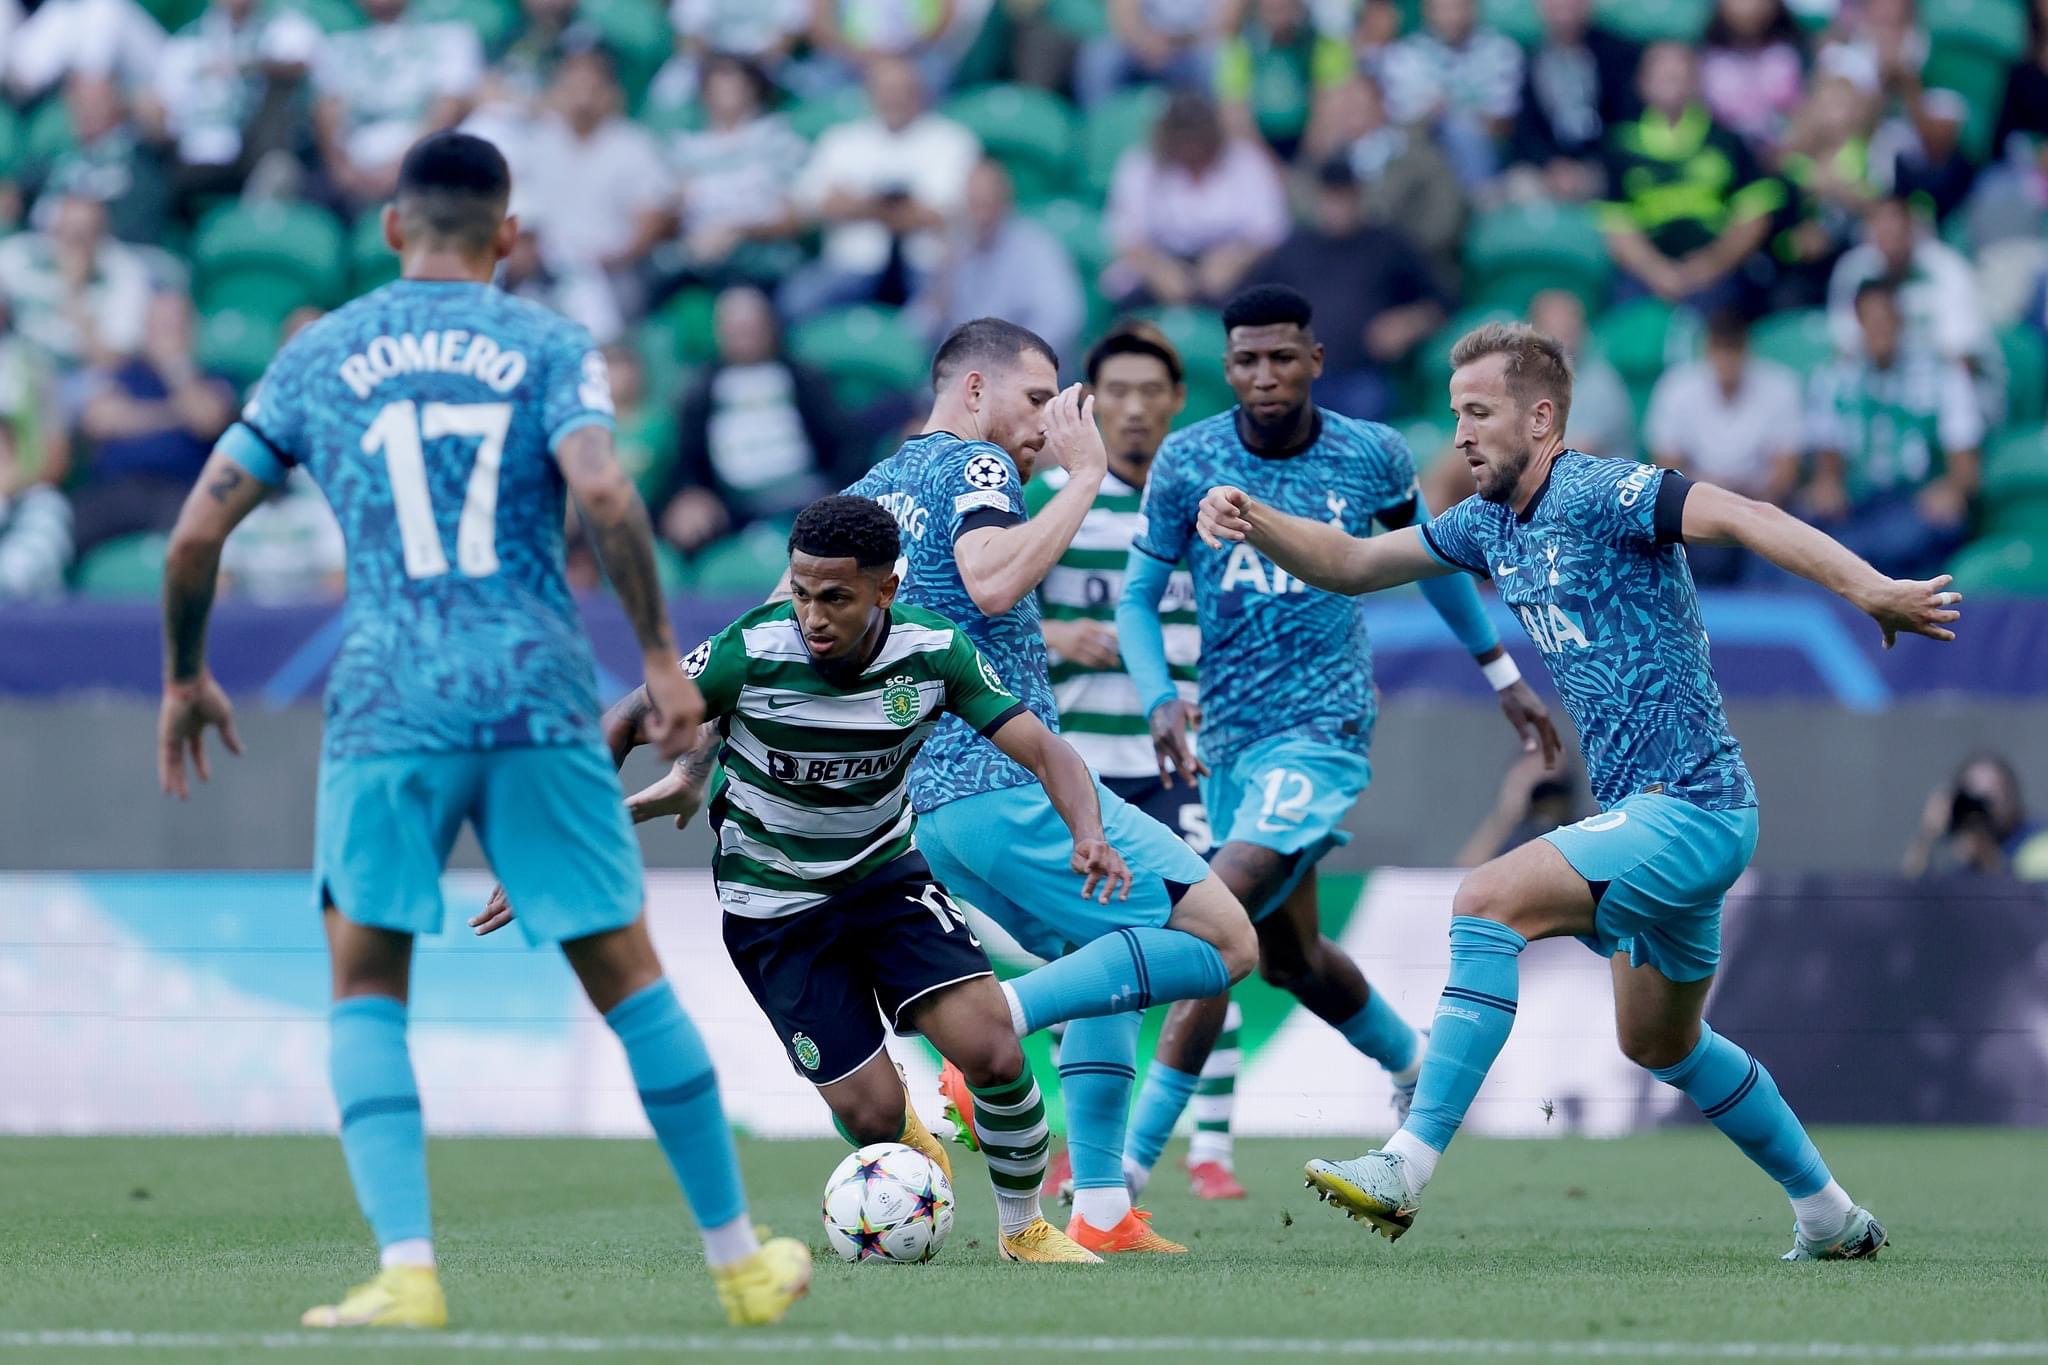 Sporting CP star Marcus Edwards going past Tottenham Hotspur players during a Champions League match in Lisbon on Tuesday night.